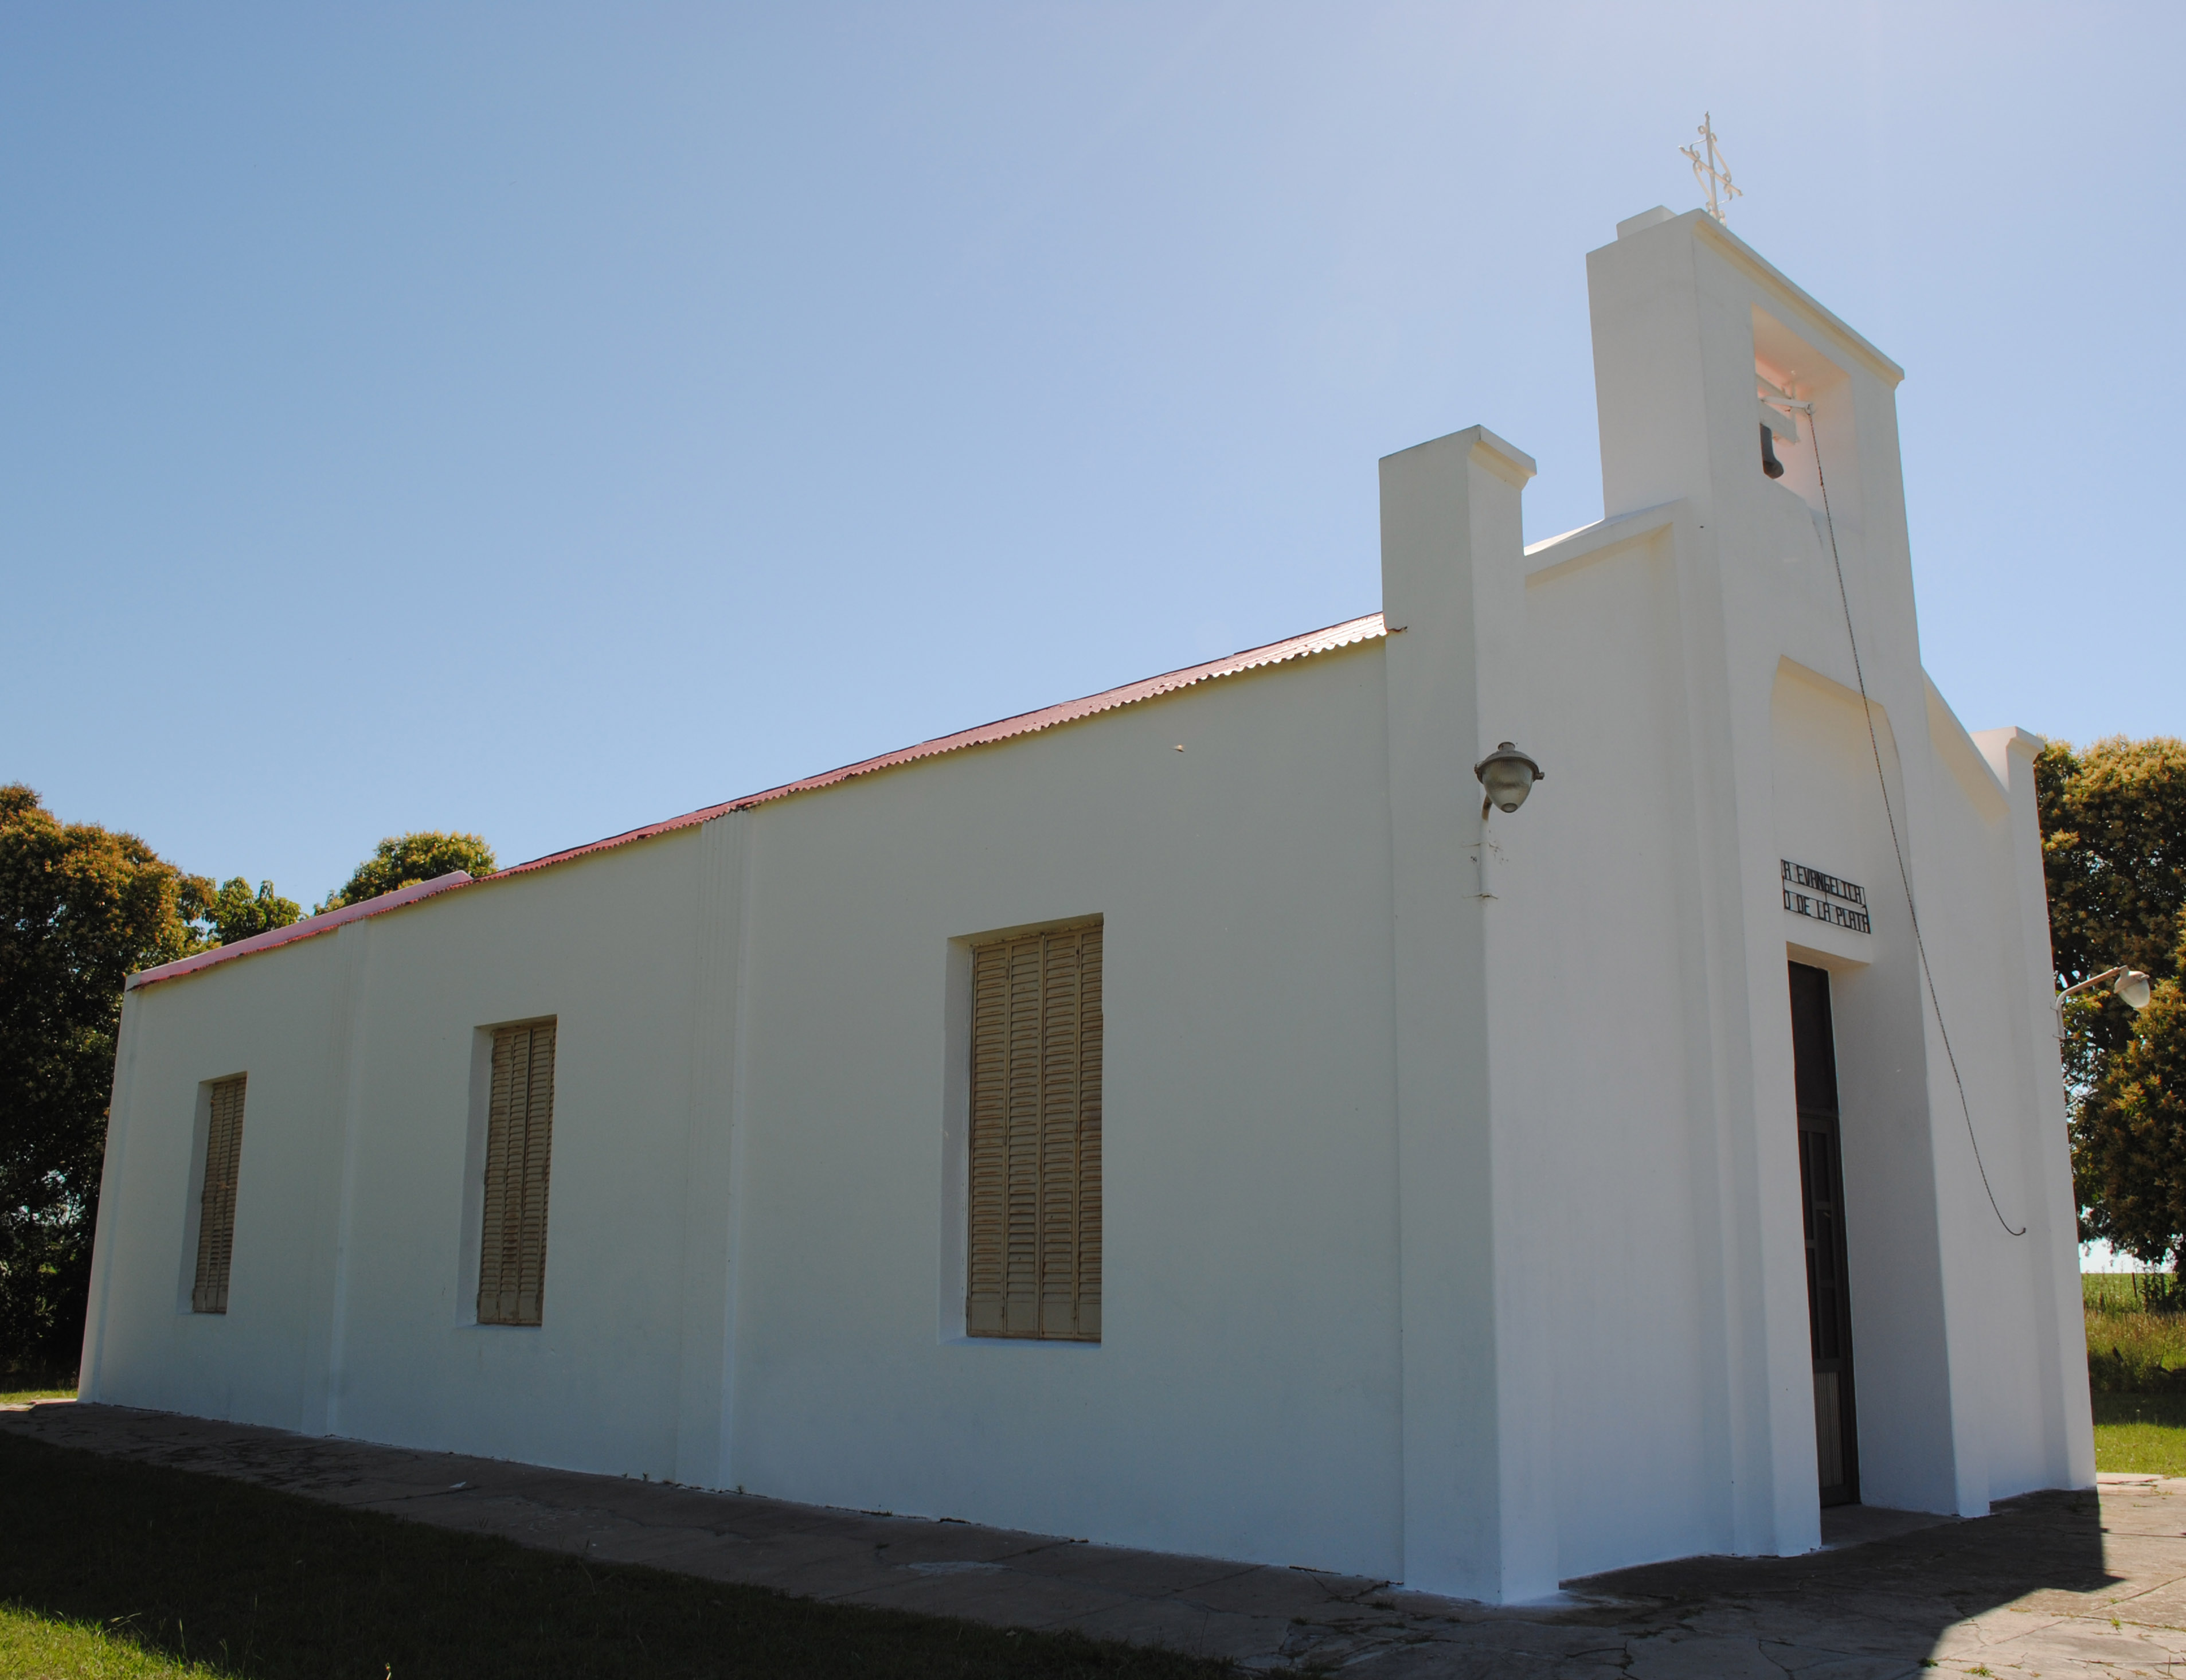 Recent photograph of the church in Stauber built in 1926. Source: Leandro Hildt.